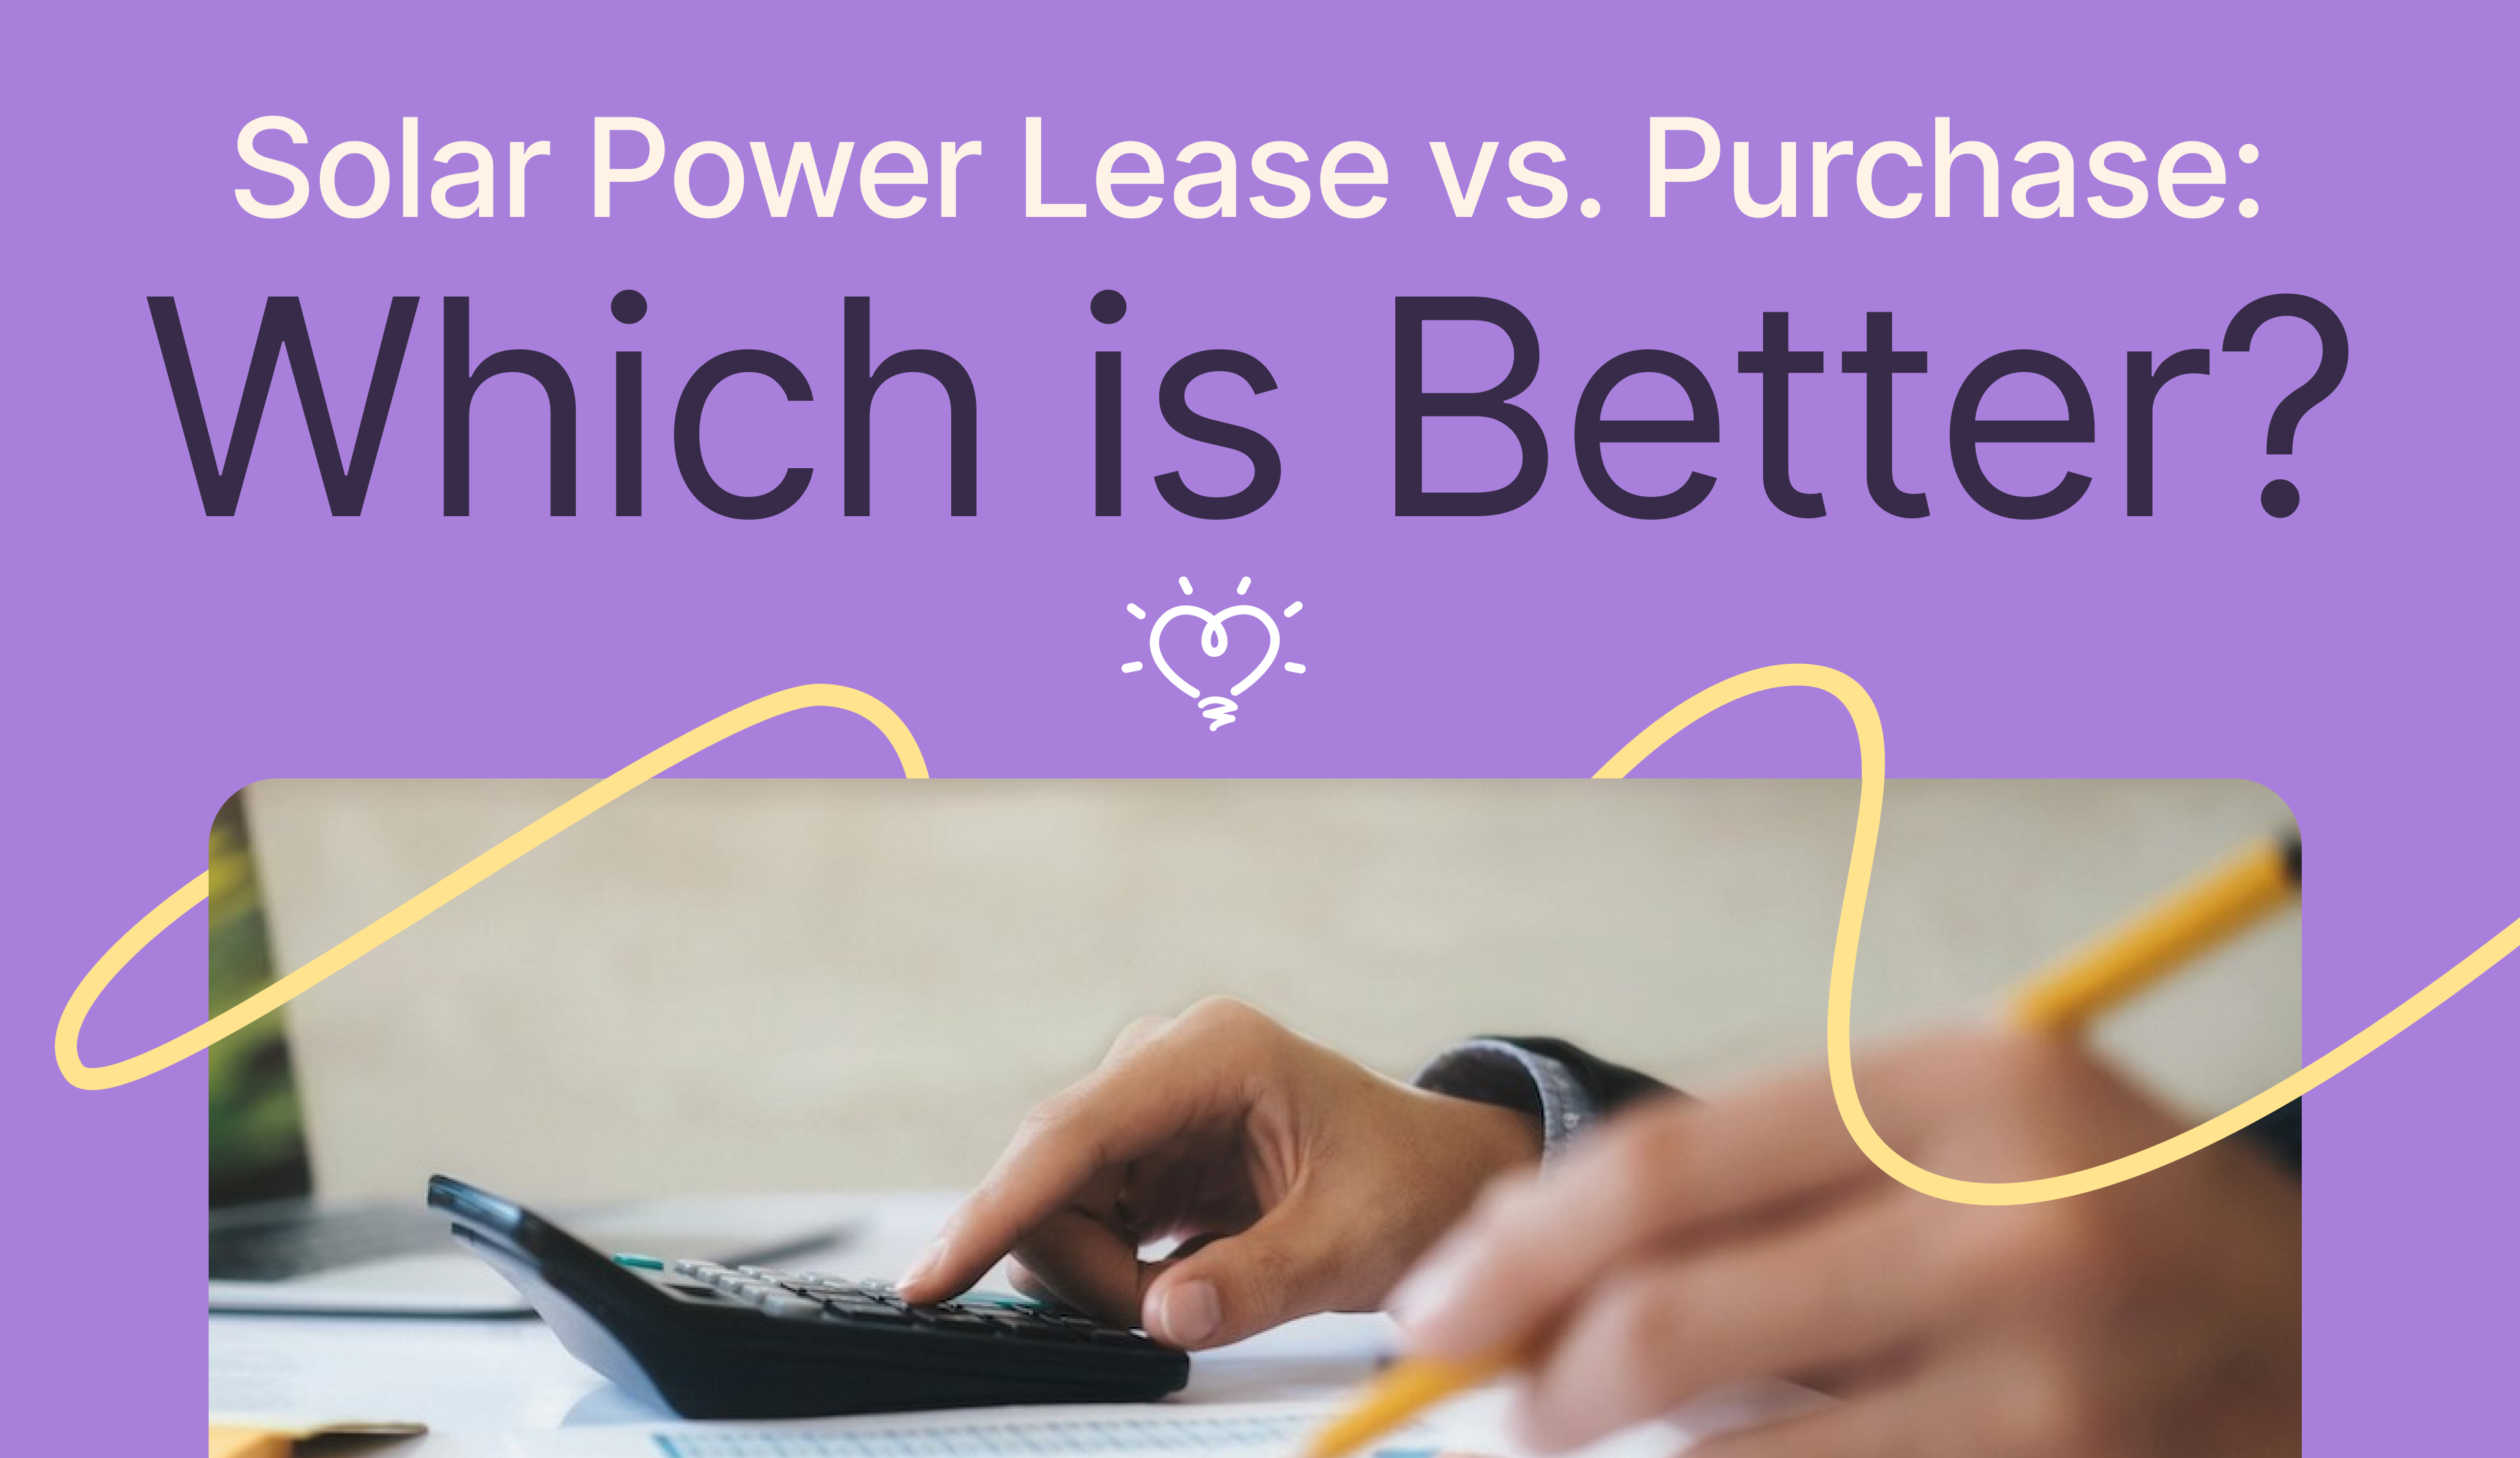 Solar Power Lease vs. Purchase: Which is Better?